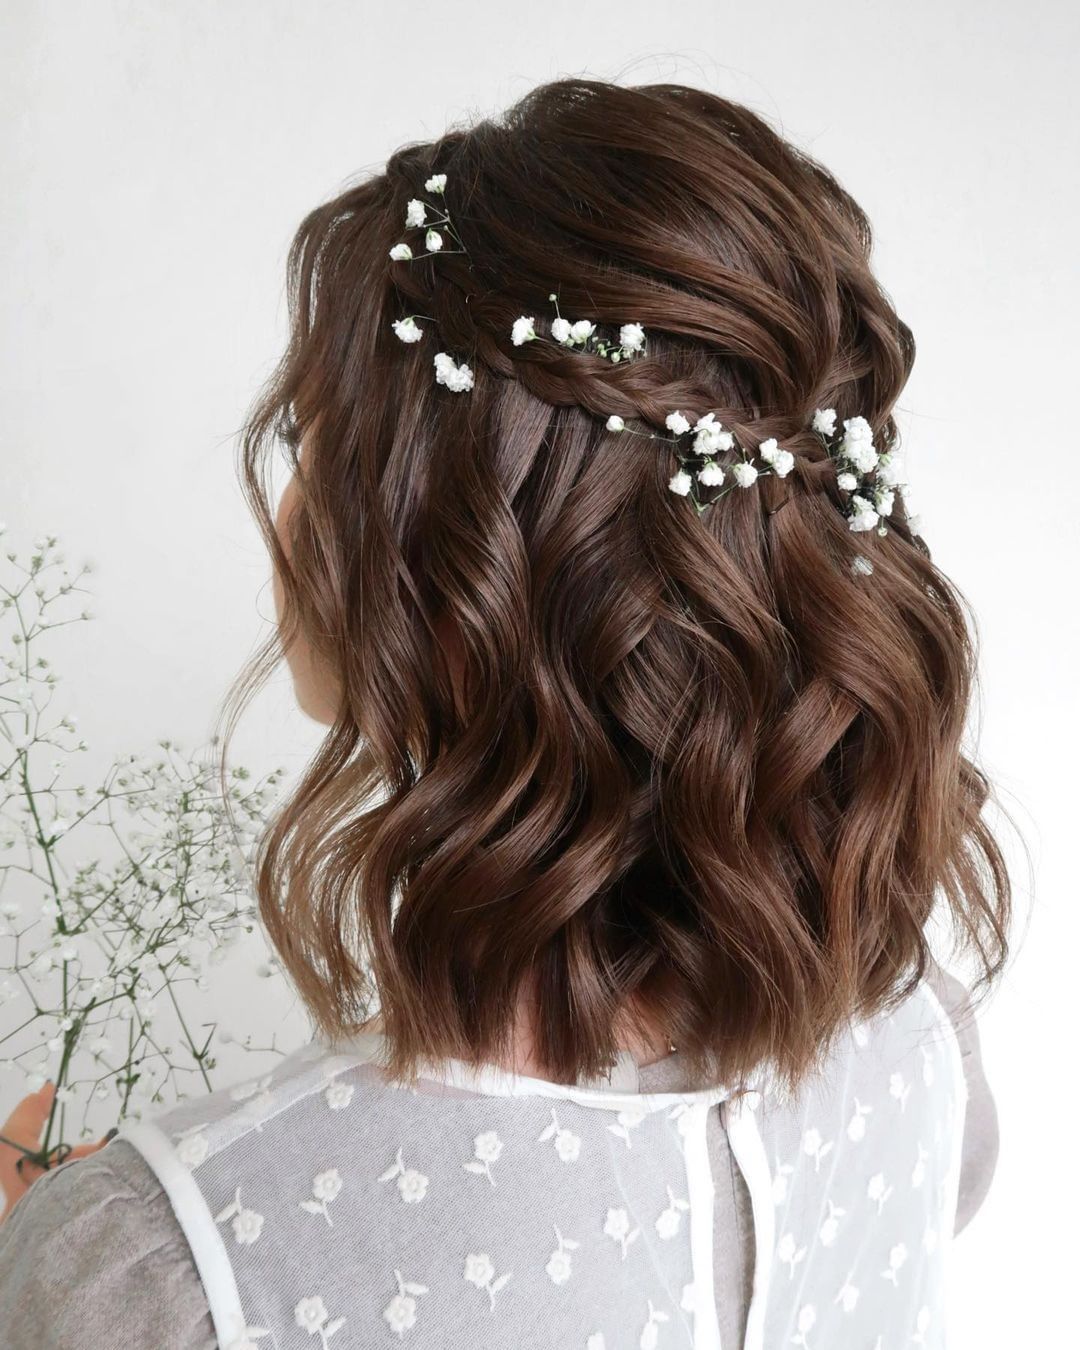 Stunning Wedding Hairstyles for Medium Length Hair to Say ‘I Do’ in Style